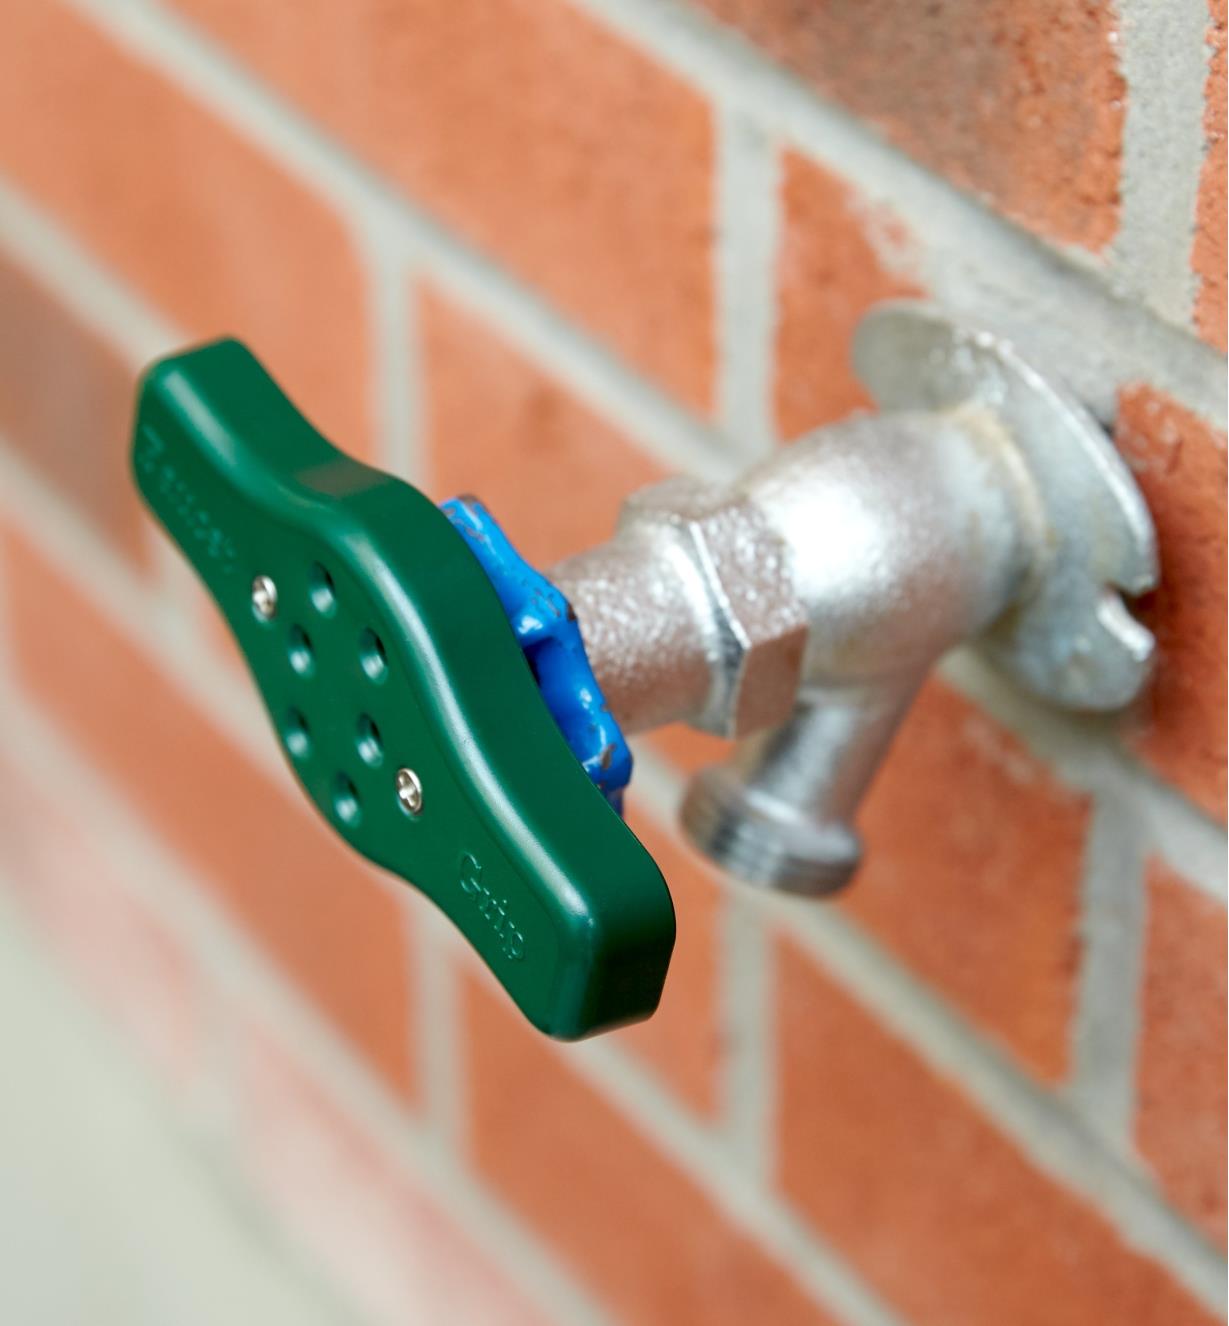 Faucet Grip installed on an outdoor faucet